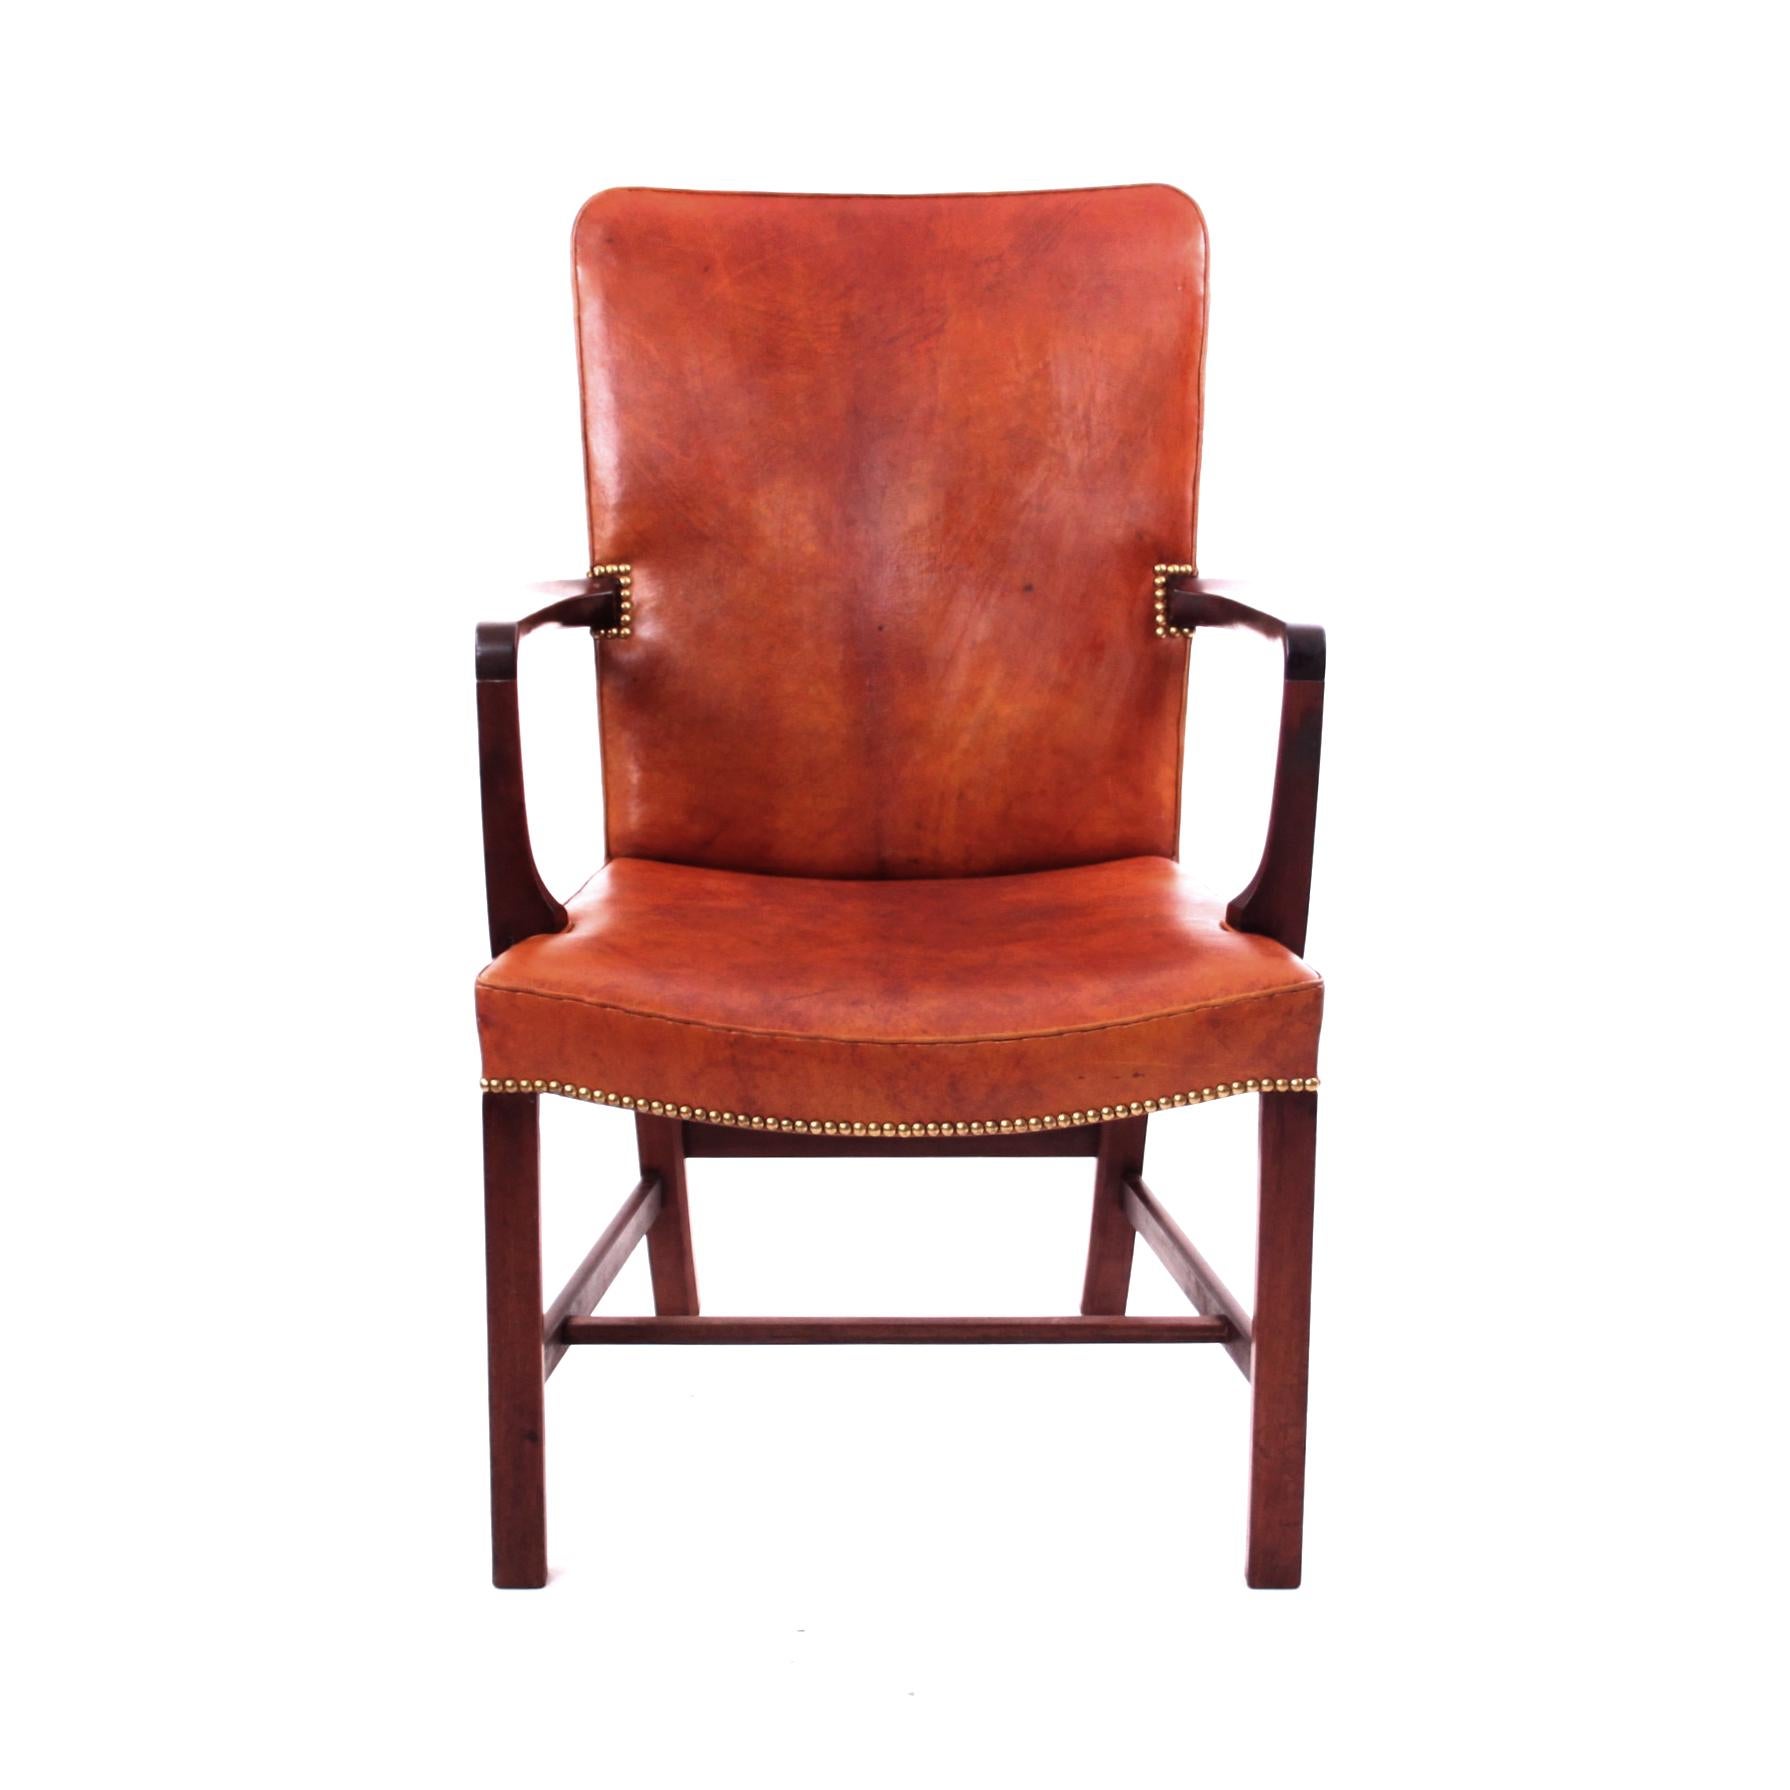 KAARE KLINT & RUD RASMUSSEN   -   SCANDINAVIAN MODERN DESIGN

A magnificent pair of Kaare Klint 'Nørrevold' armchairs in Nigerian leather, model no. 5999. This is the largest chair in the series of 